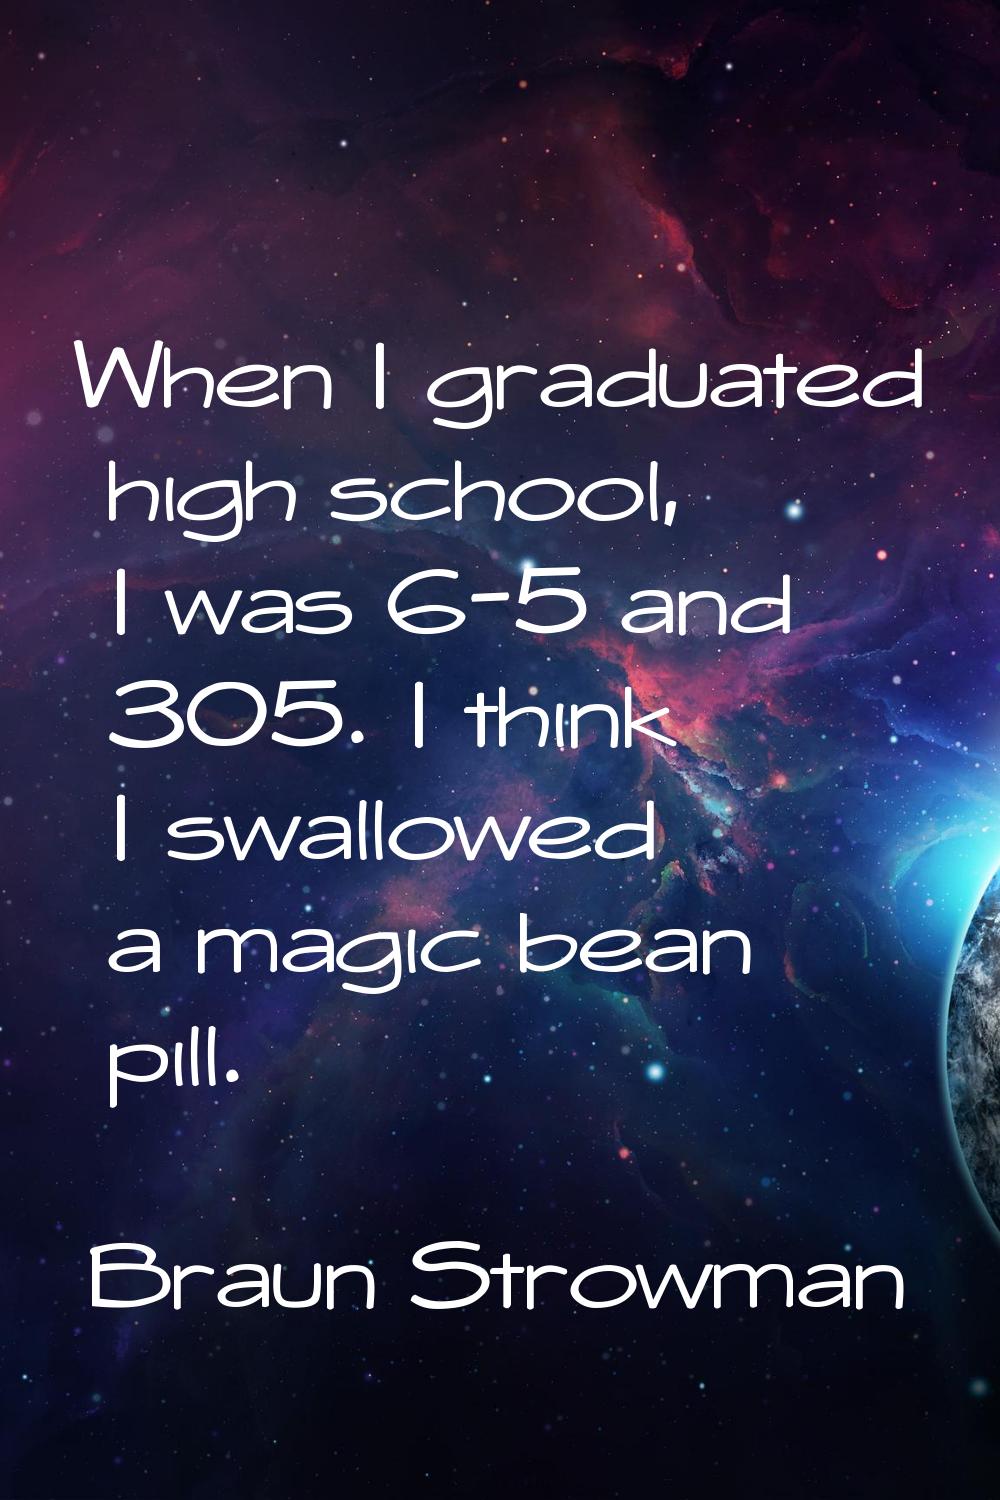 When I graduated high school, I was 6-5 and 305. I think I swallowed a magic bean pill.